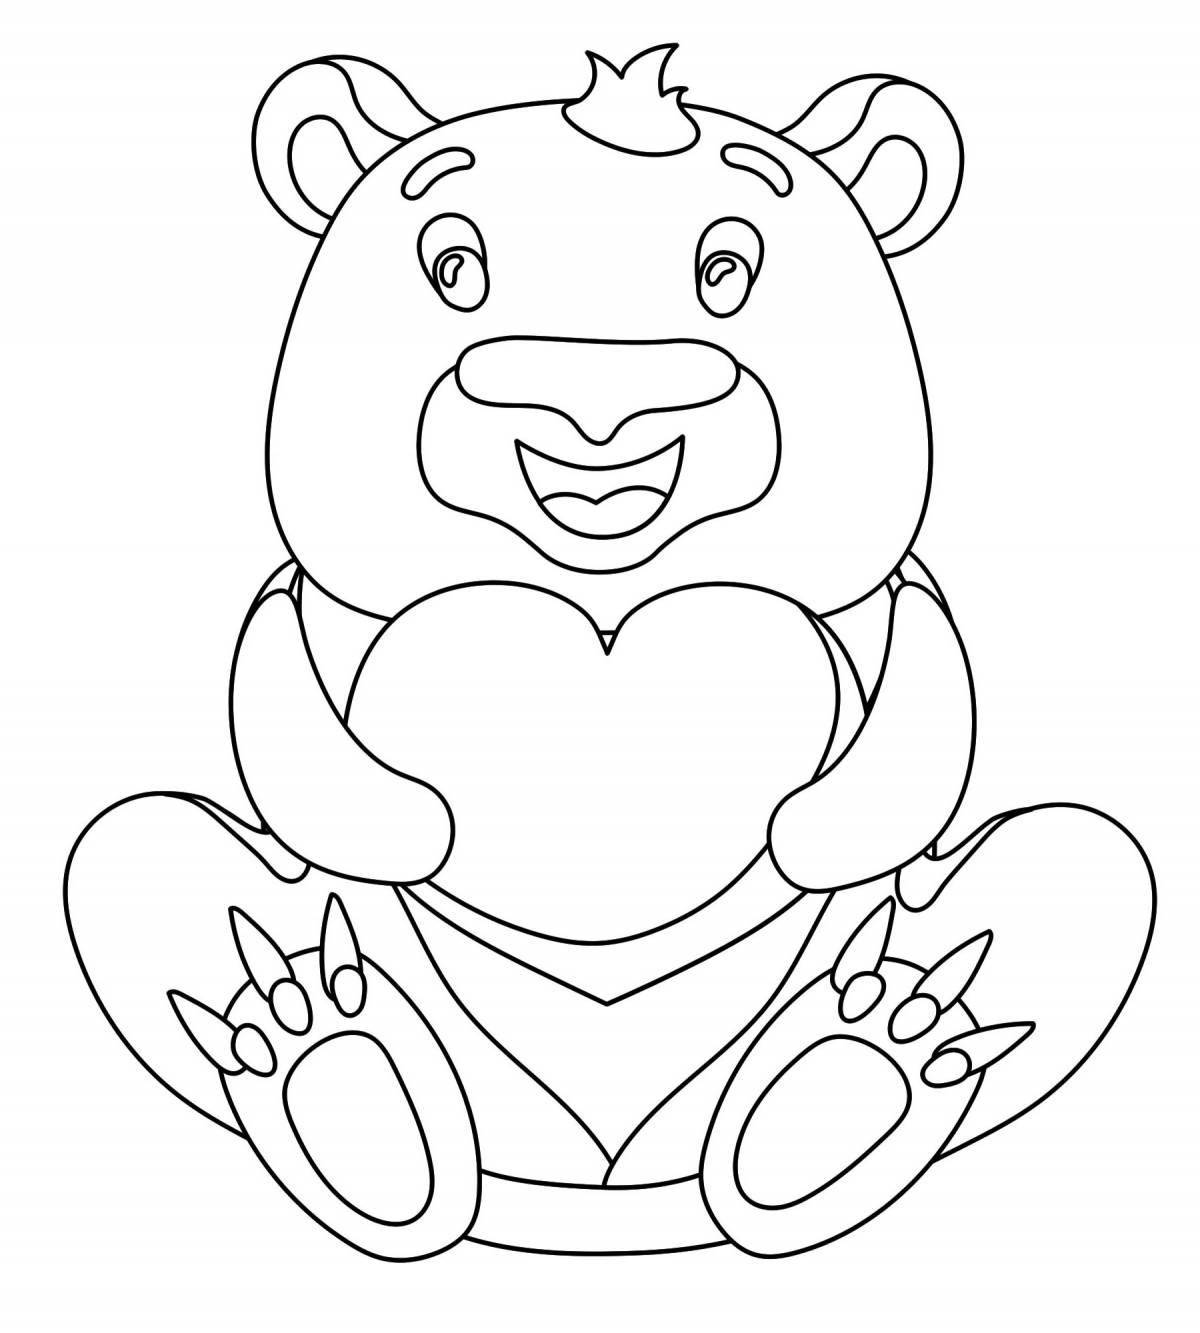 Teddy bear coloring book for children 6-7 years old